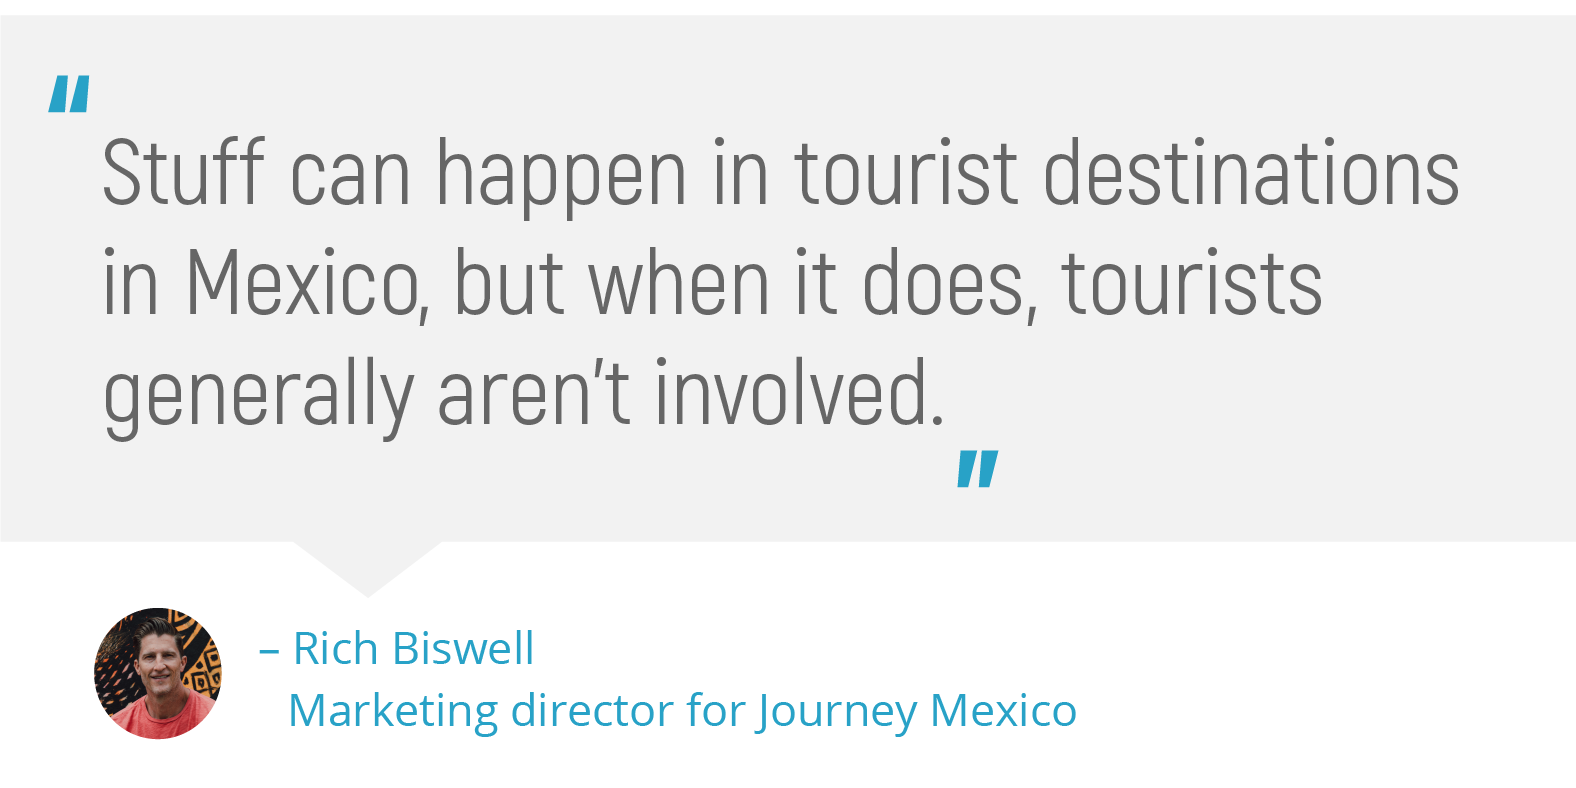 "Stuff can happen in tourist destinations in Mexico, but when it does, tourists generally aren't involved."